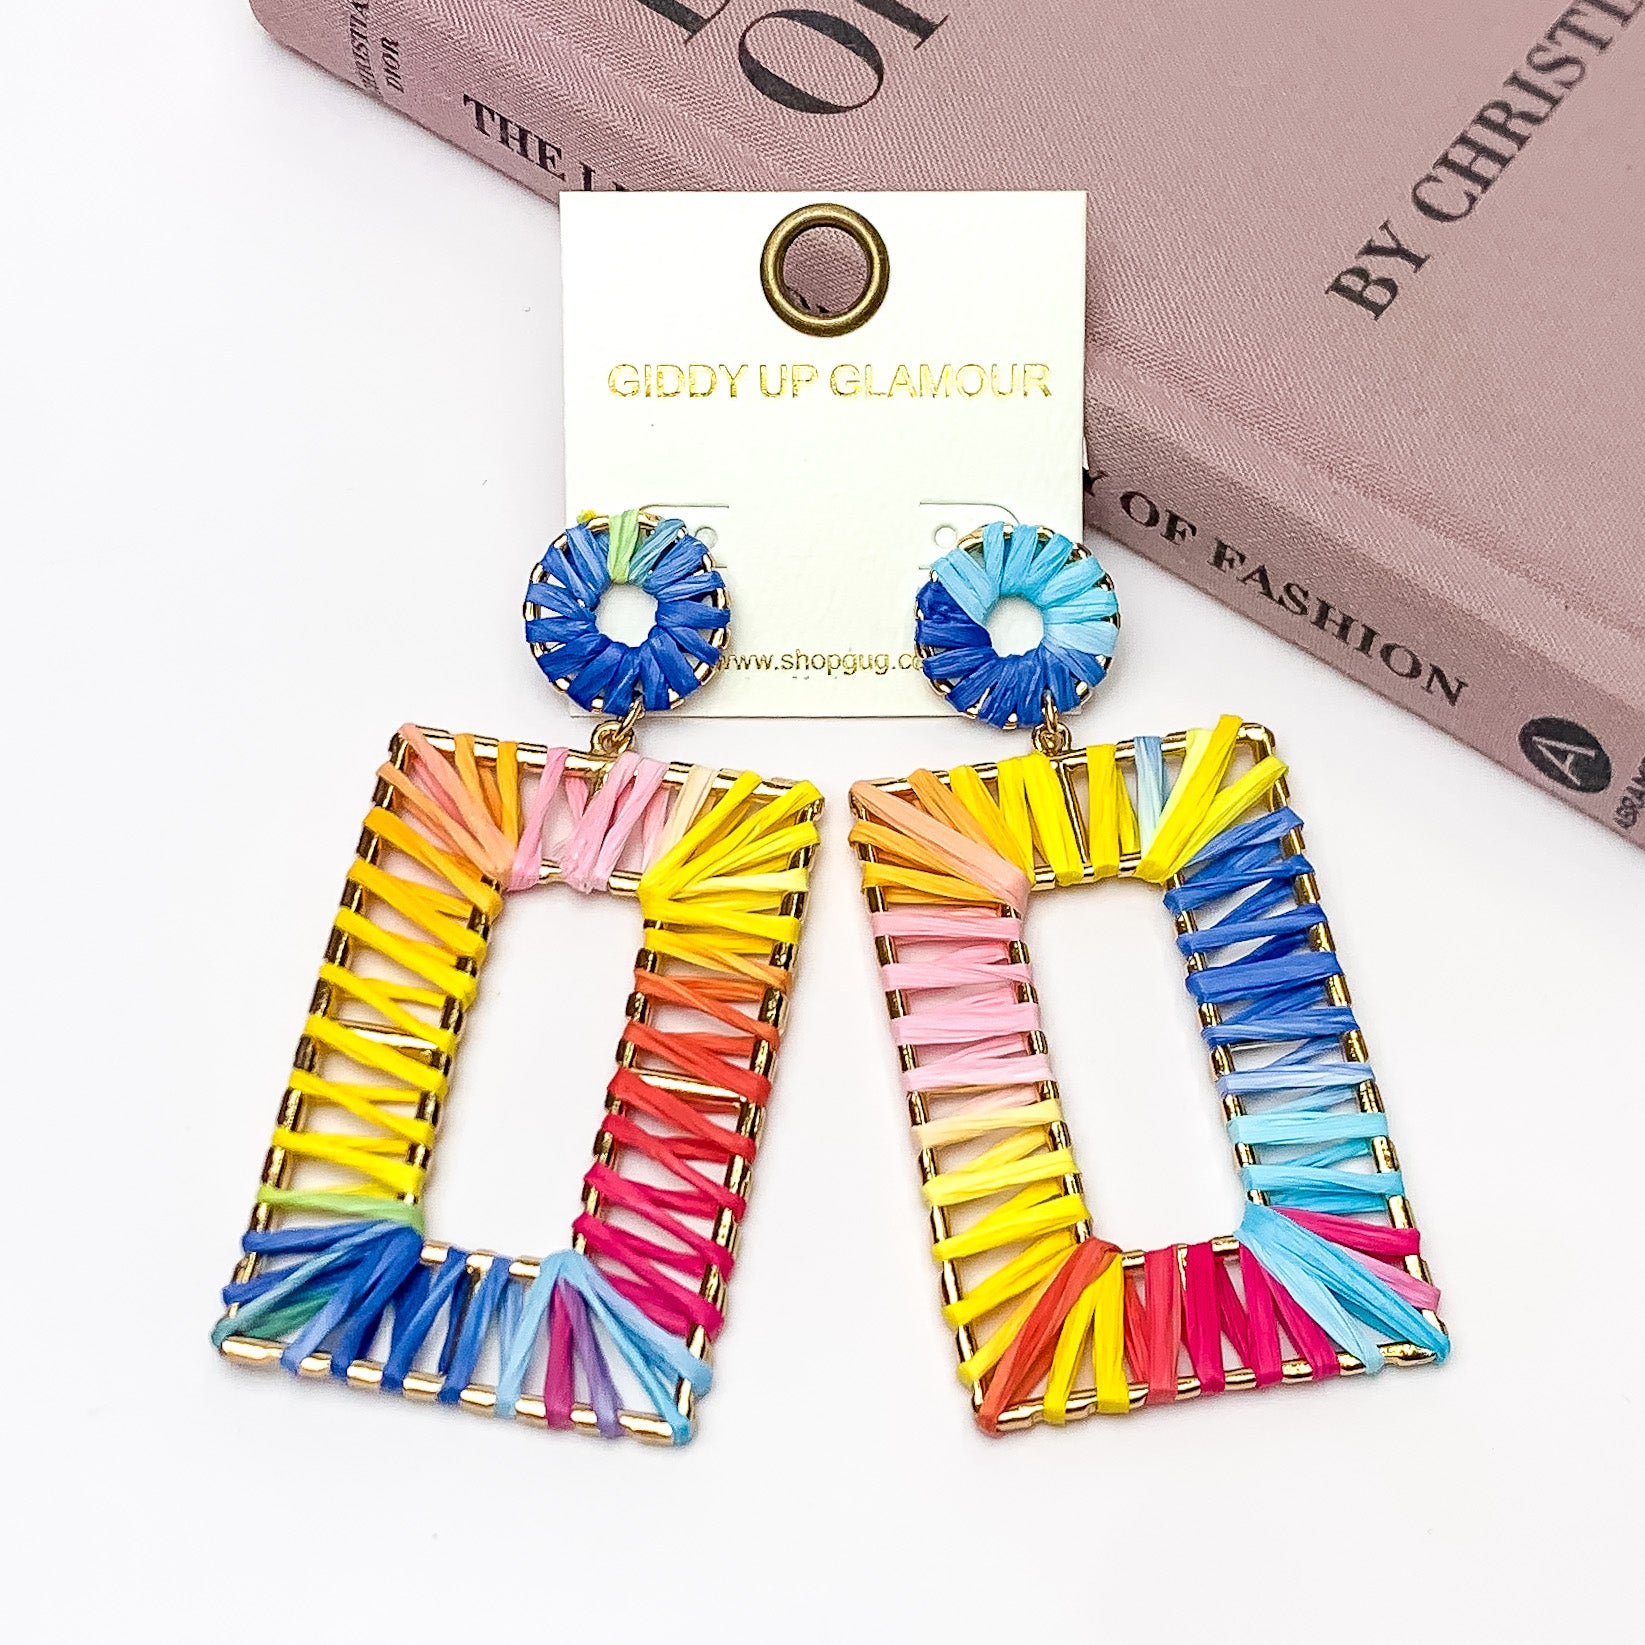 Rainbow Sunshine Open Rectangle Earrings in Multicolor. Pictured on a white background with the earrings laying against a book.